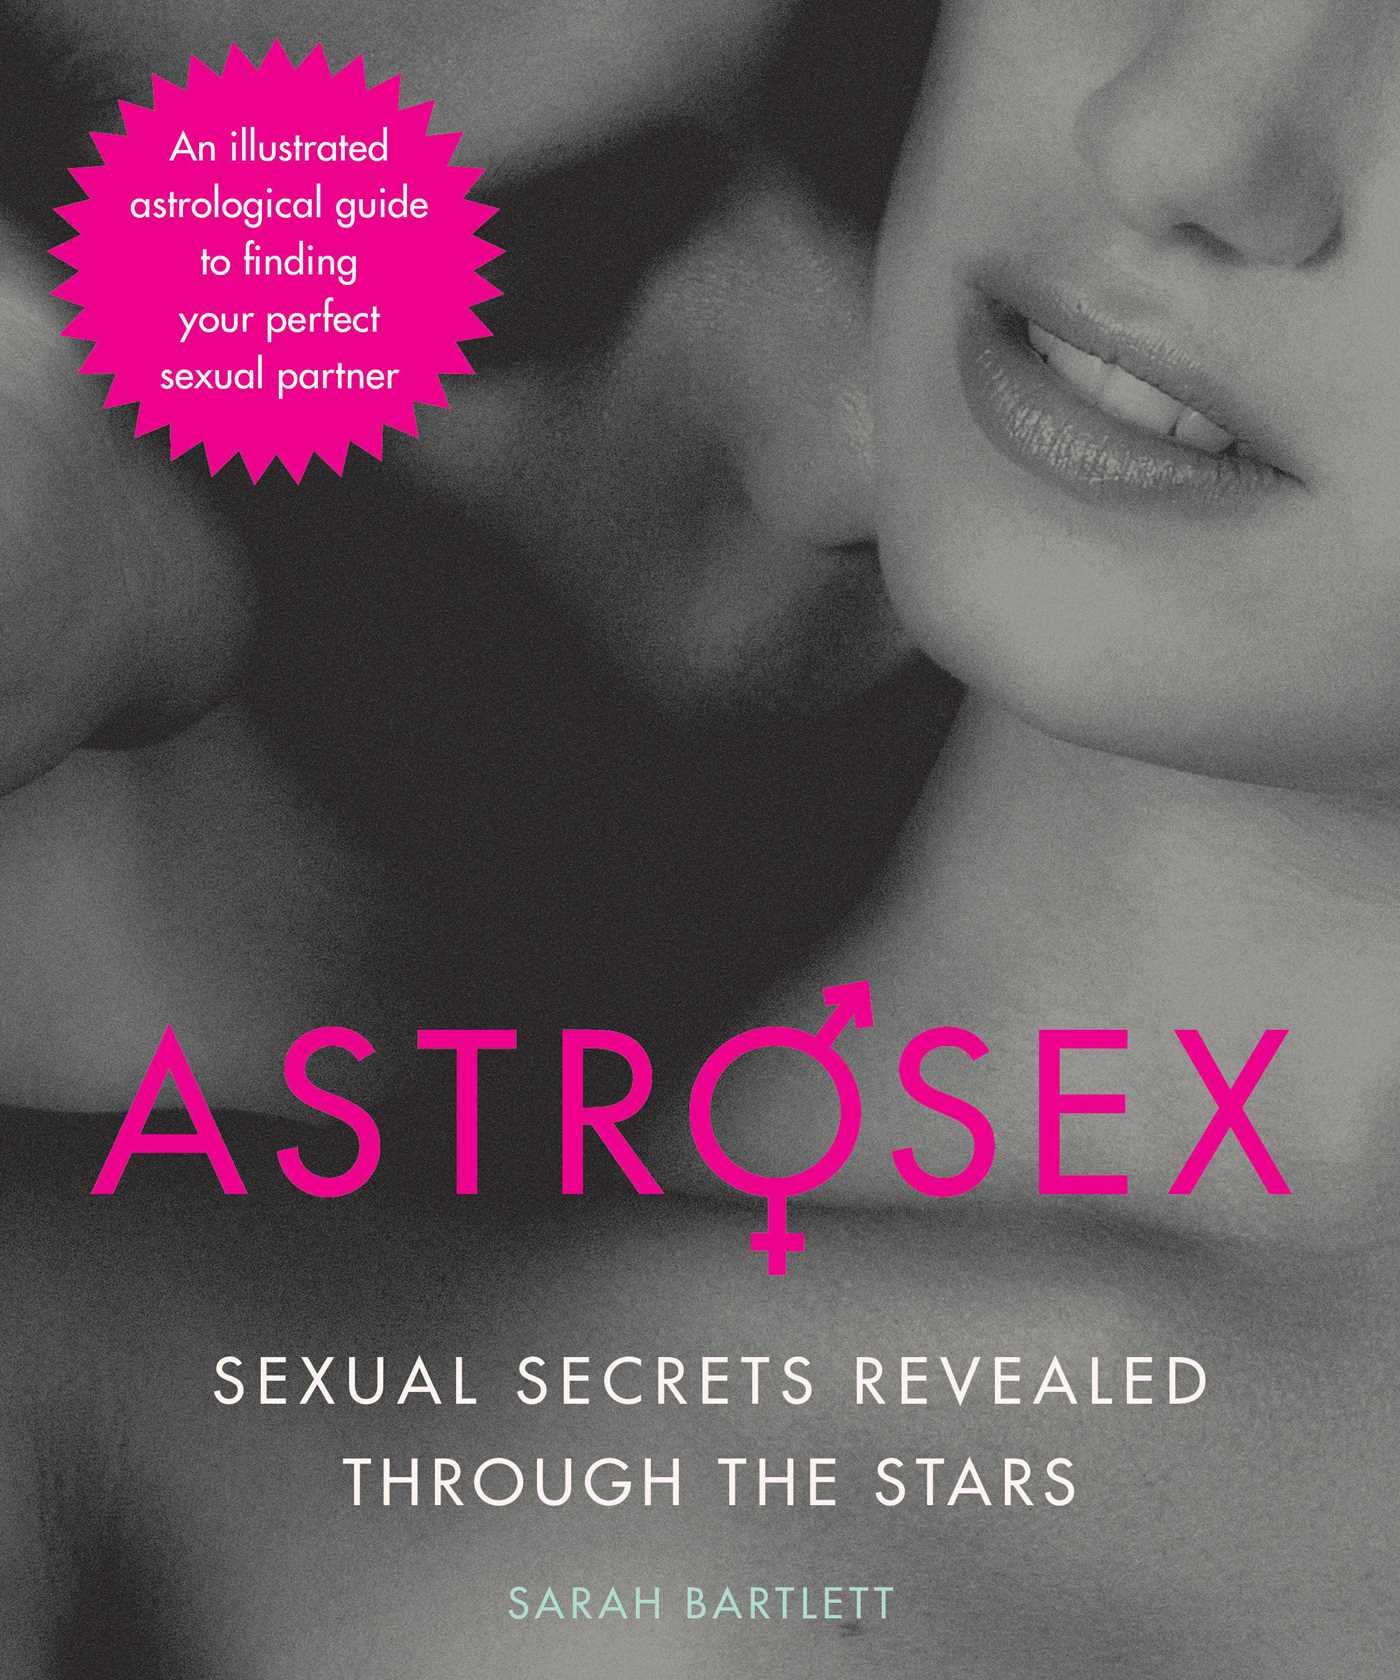 Astrosex Sexual Secrets Revealed through the Stars by Sarah Bartlett hq pic